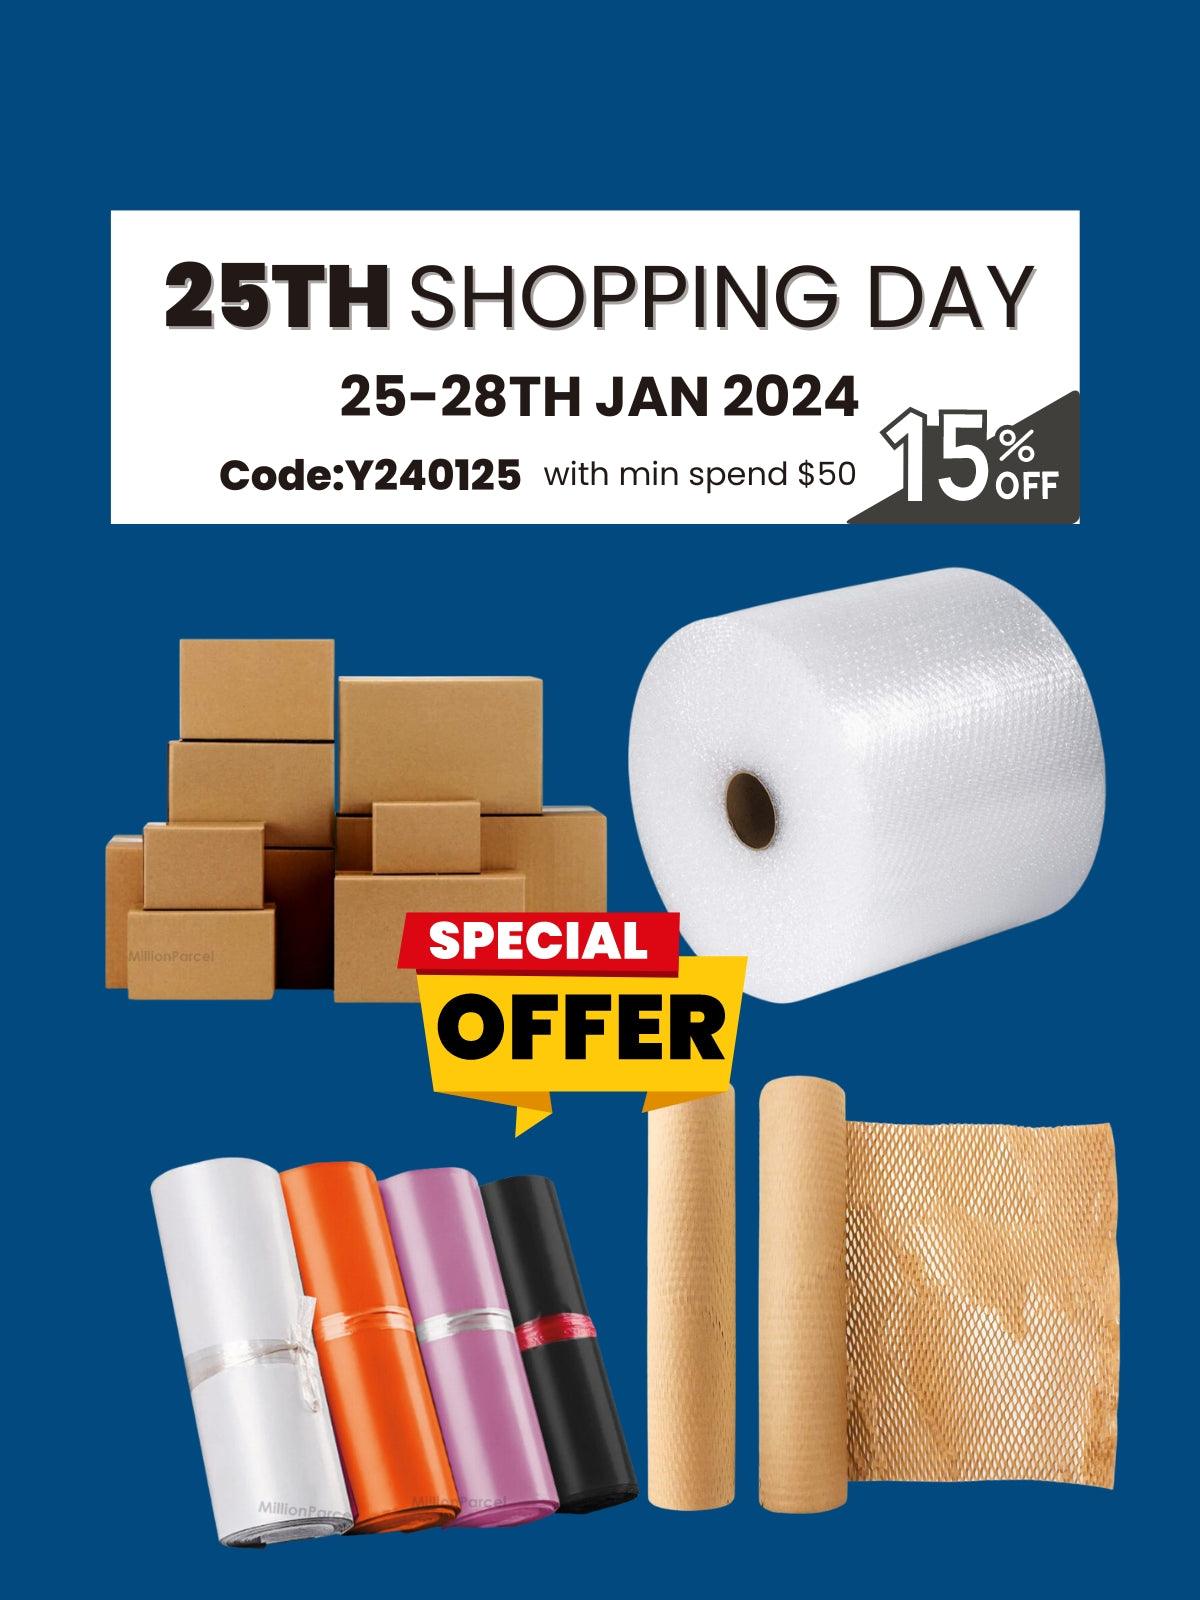 🎉 Celebrate the 25th Shopping Day Extravaganza with Perfect Packaging Deals! 🎉 - MillionParcel